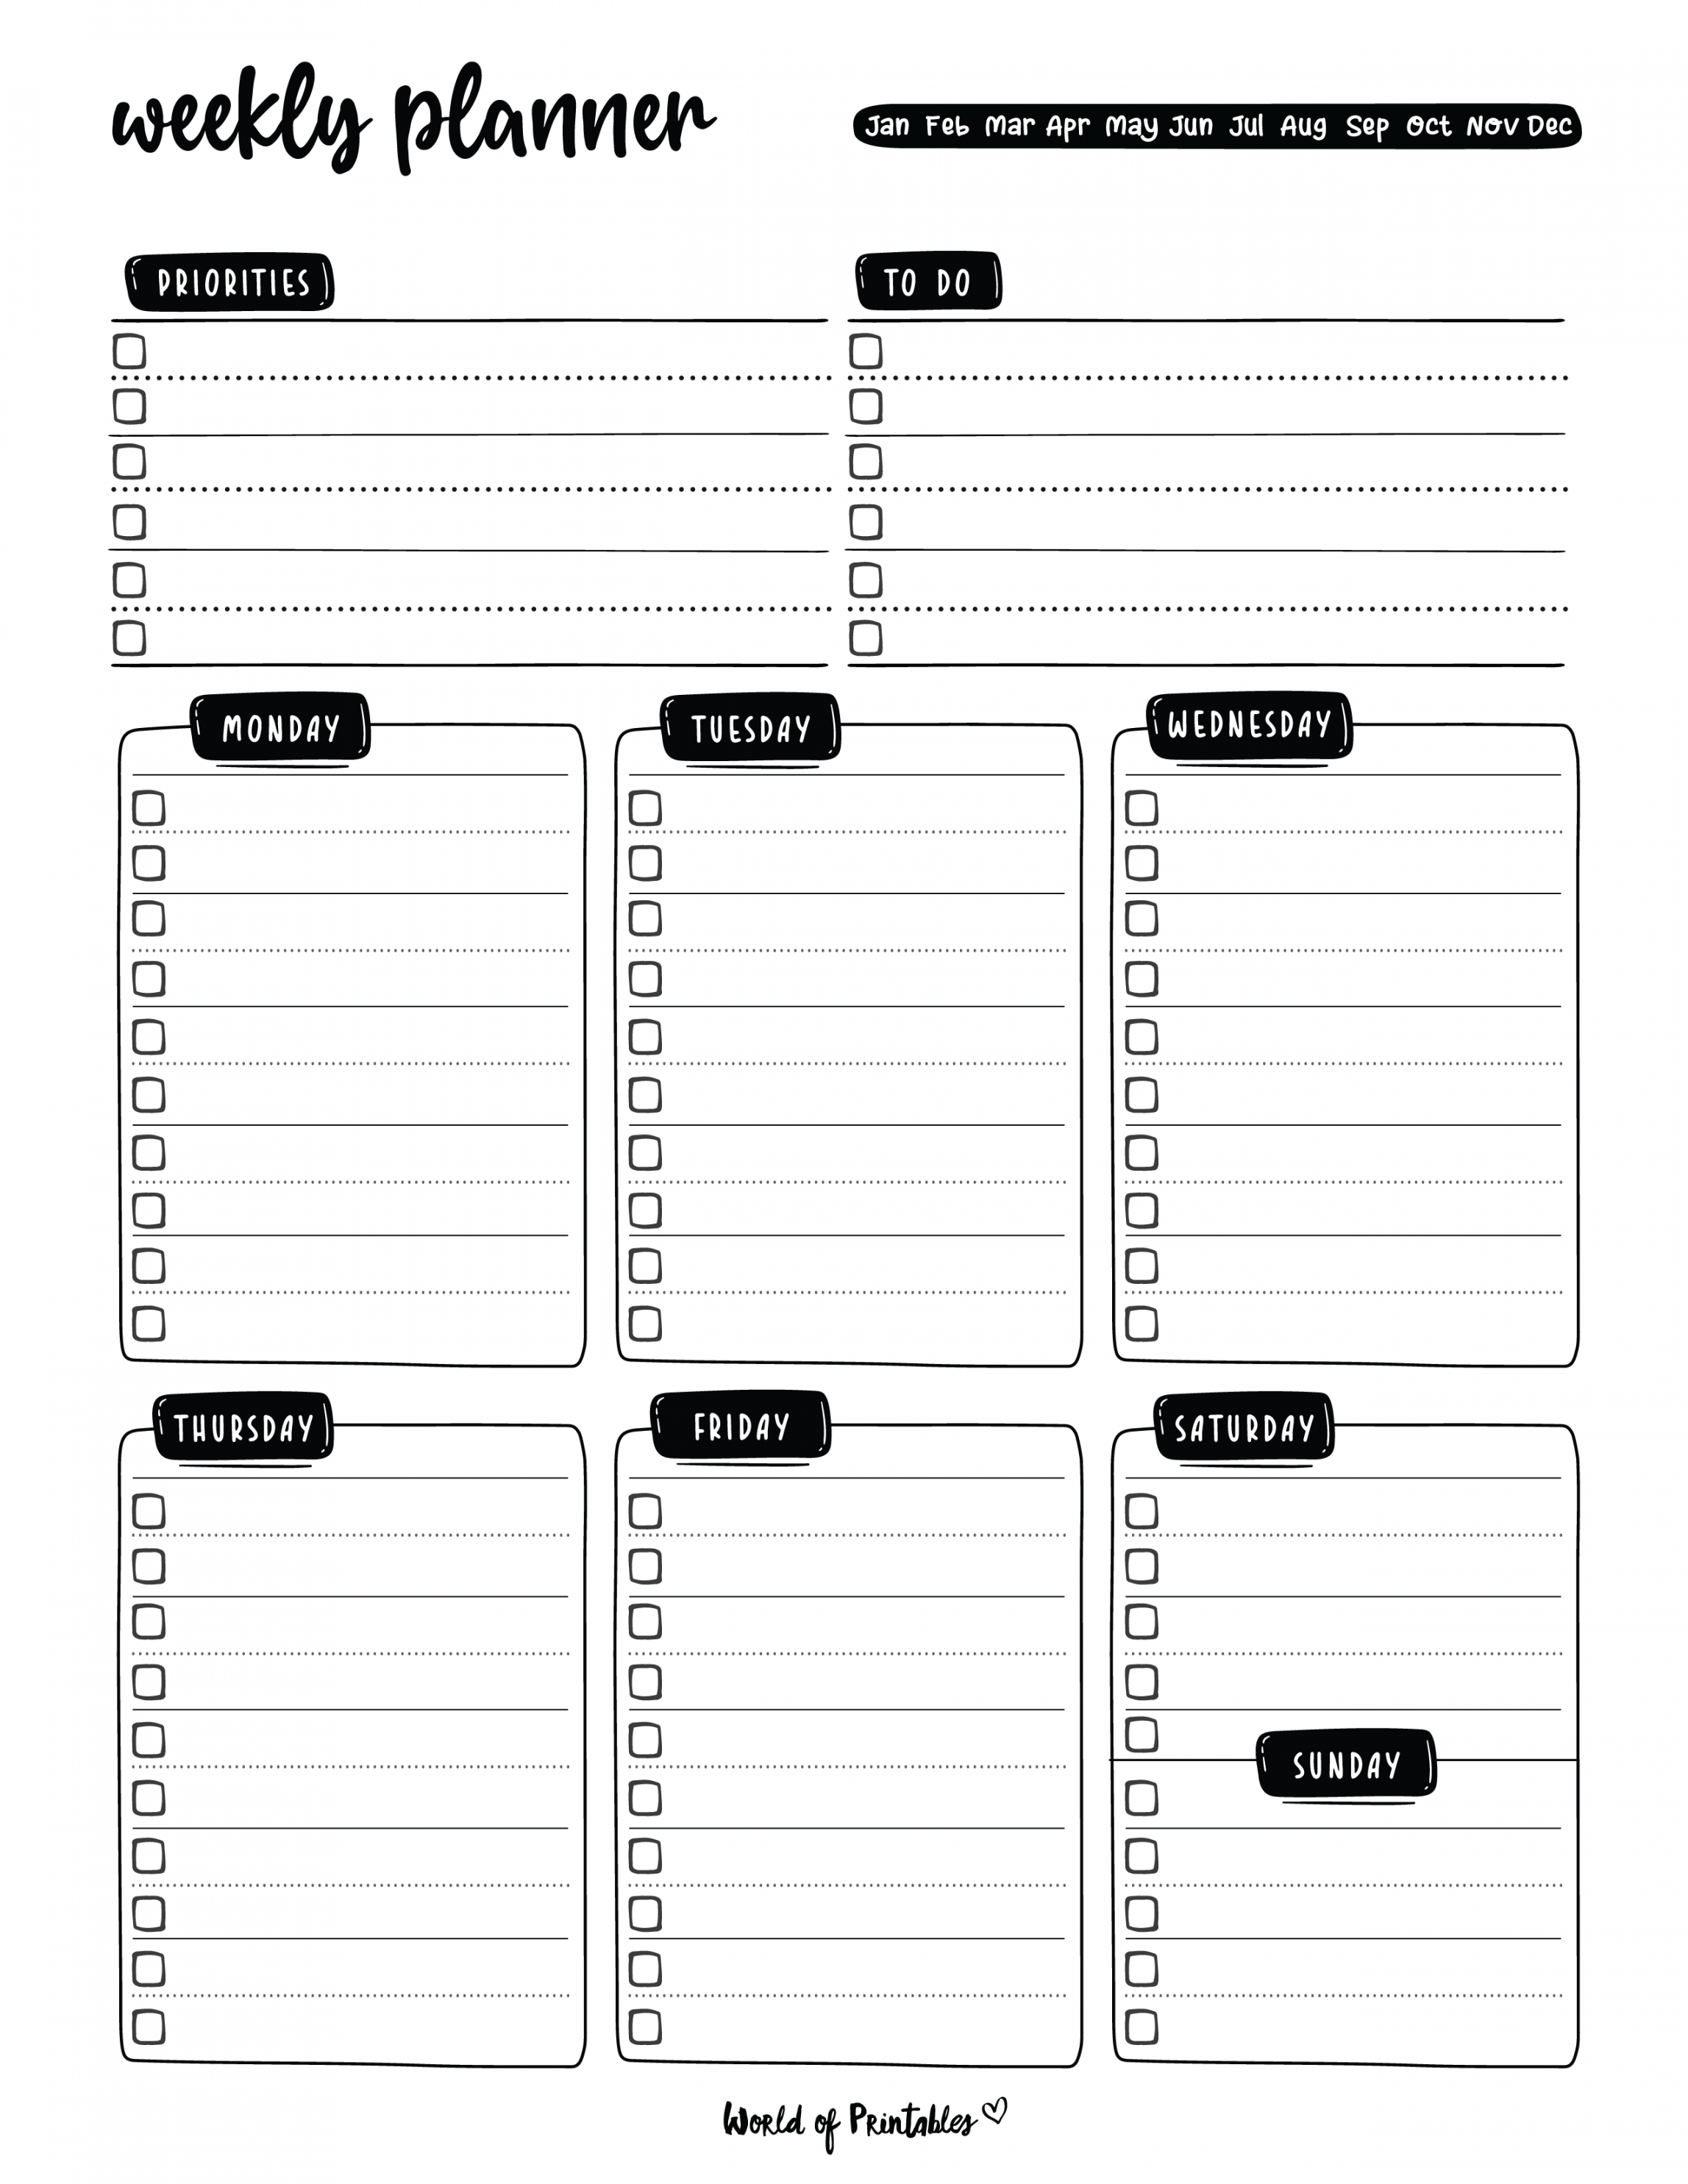 Weekly Planner Templates - World of Printables